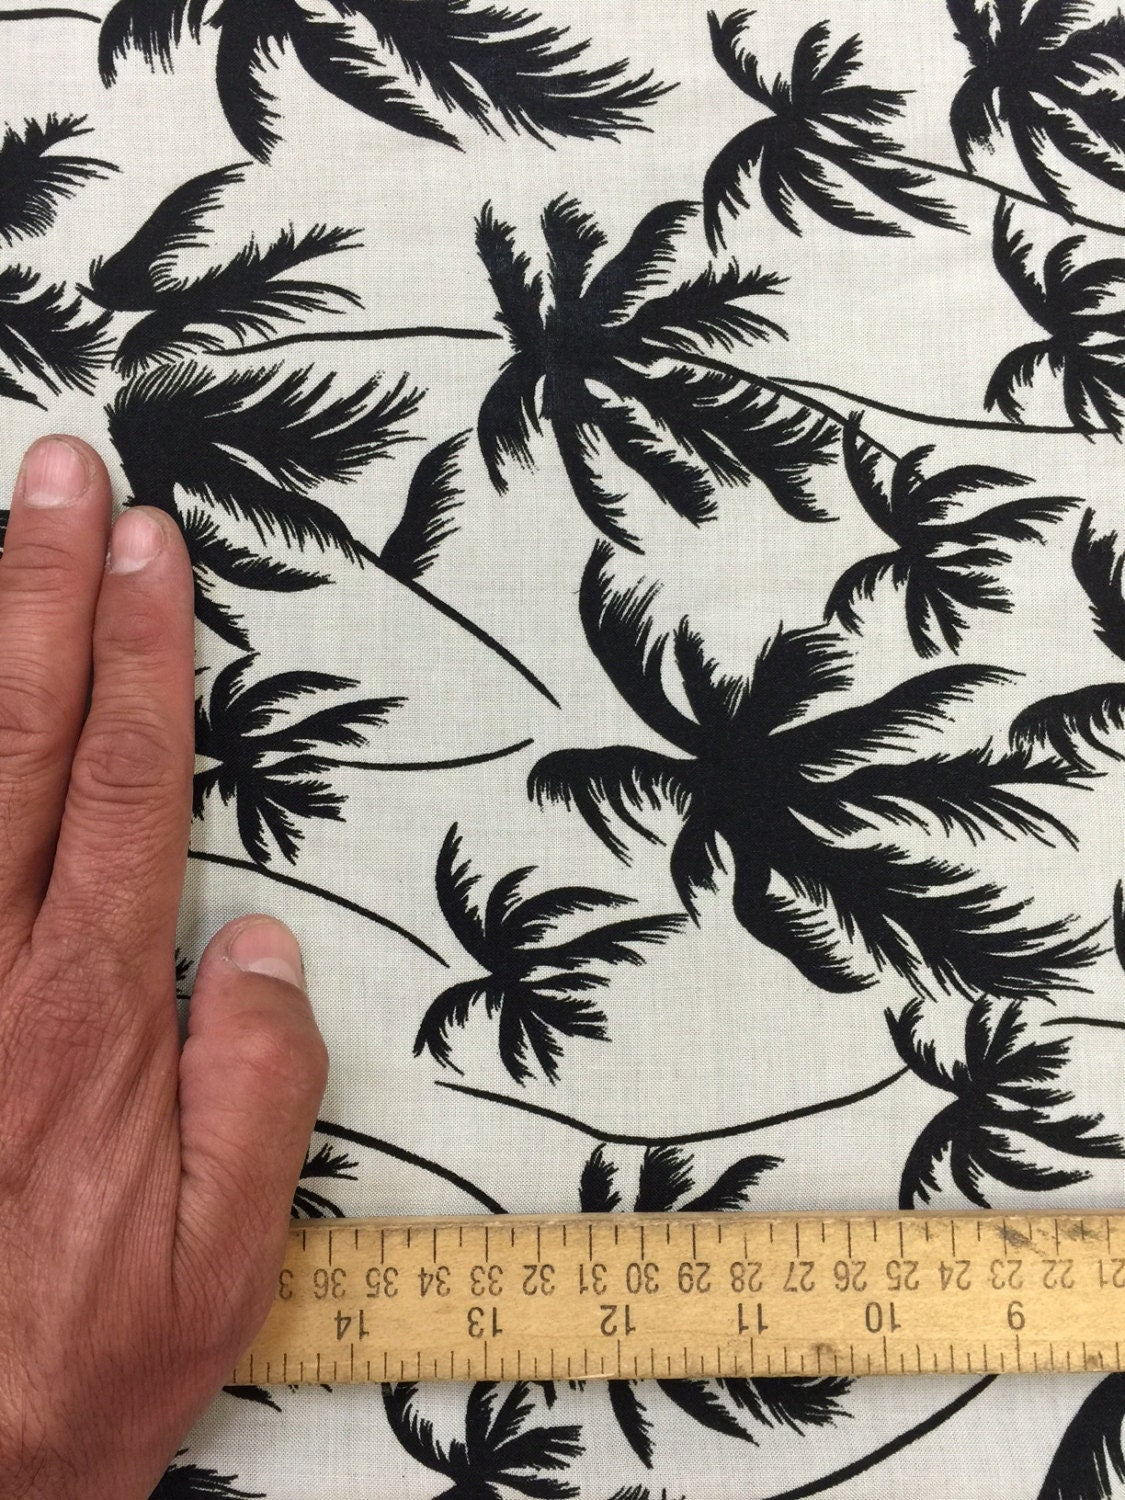 100% Rayon Challis Off white background w Black palm trees. Fabric sold by the yard soft organic kids dress draping clothing decoration